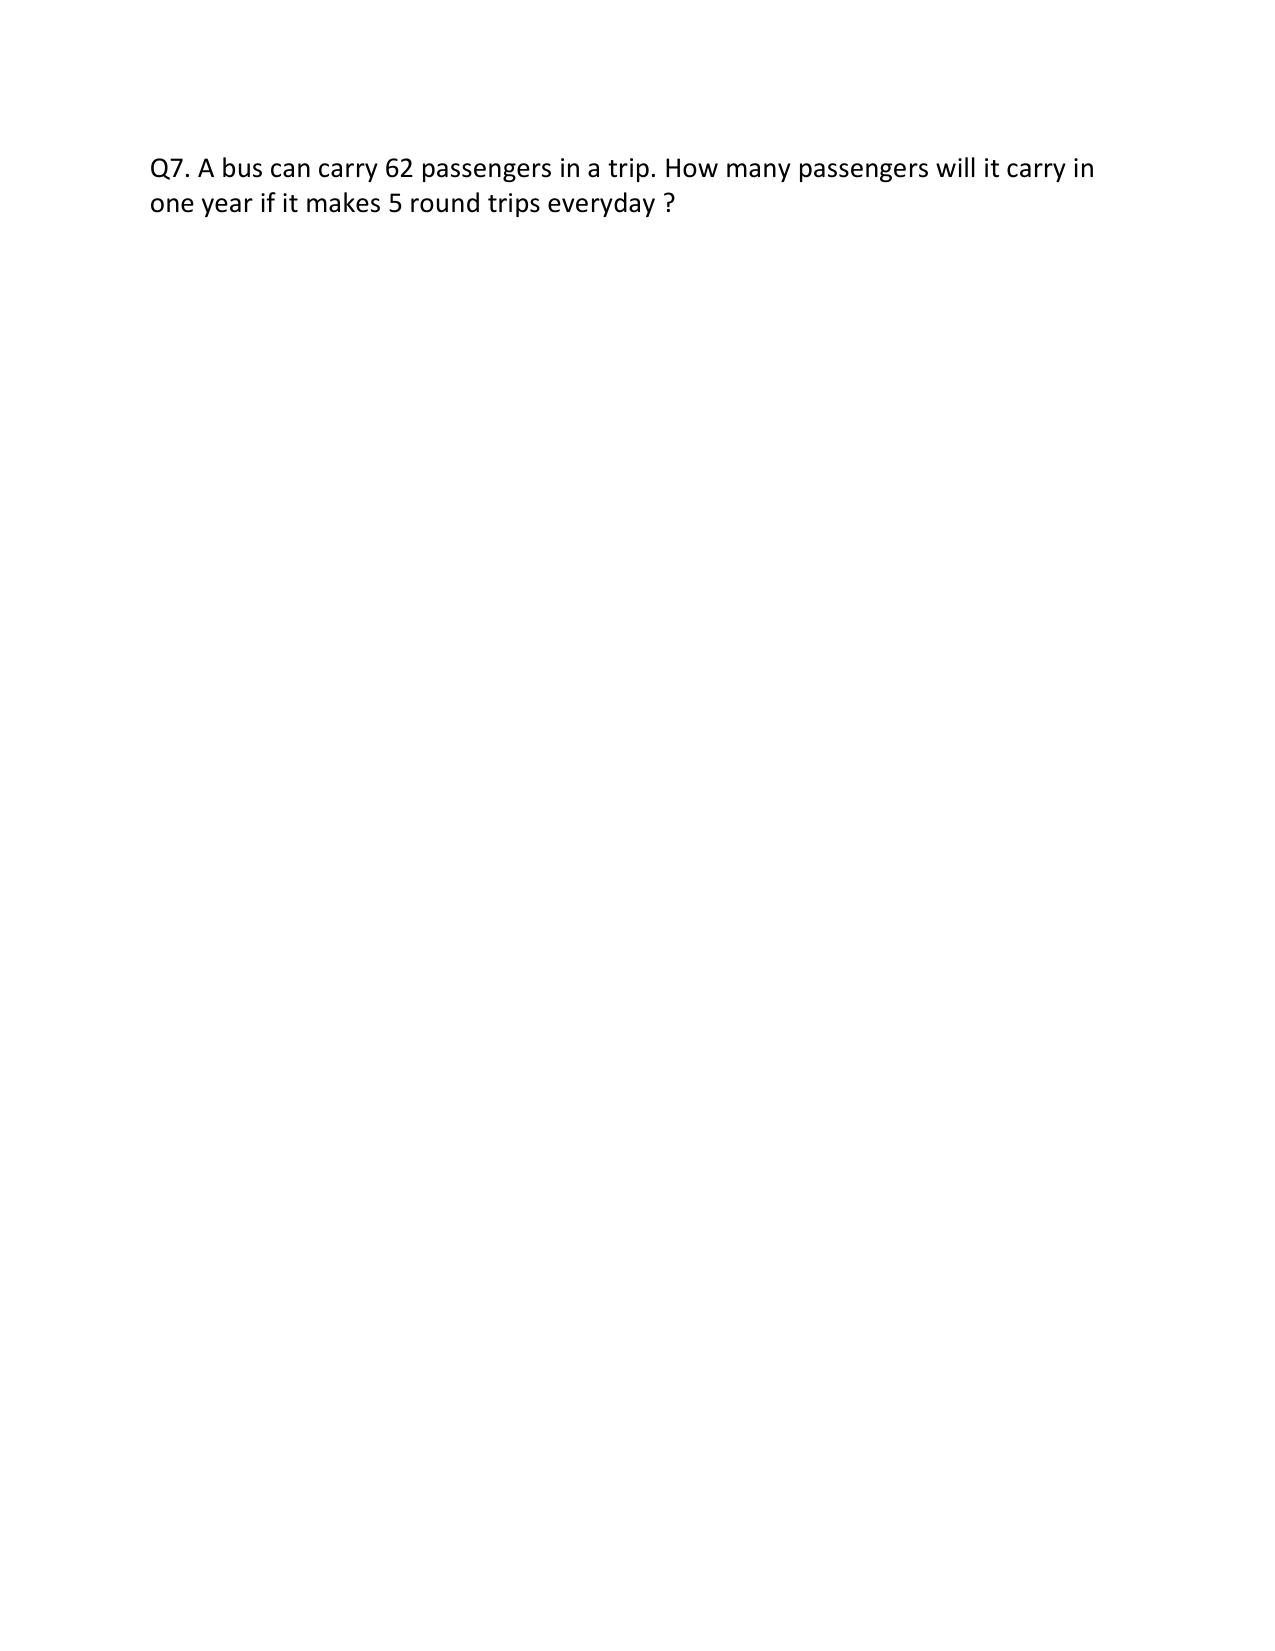 Worksheet for Class 5 Maths Assignment 23 - Page 2